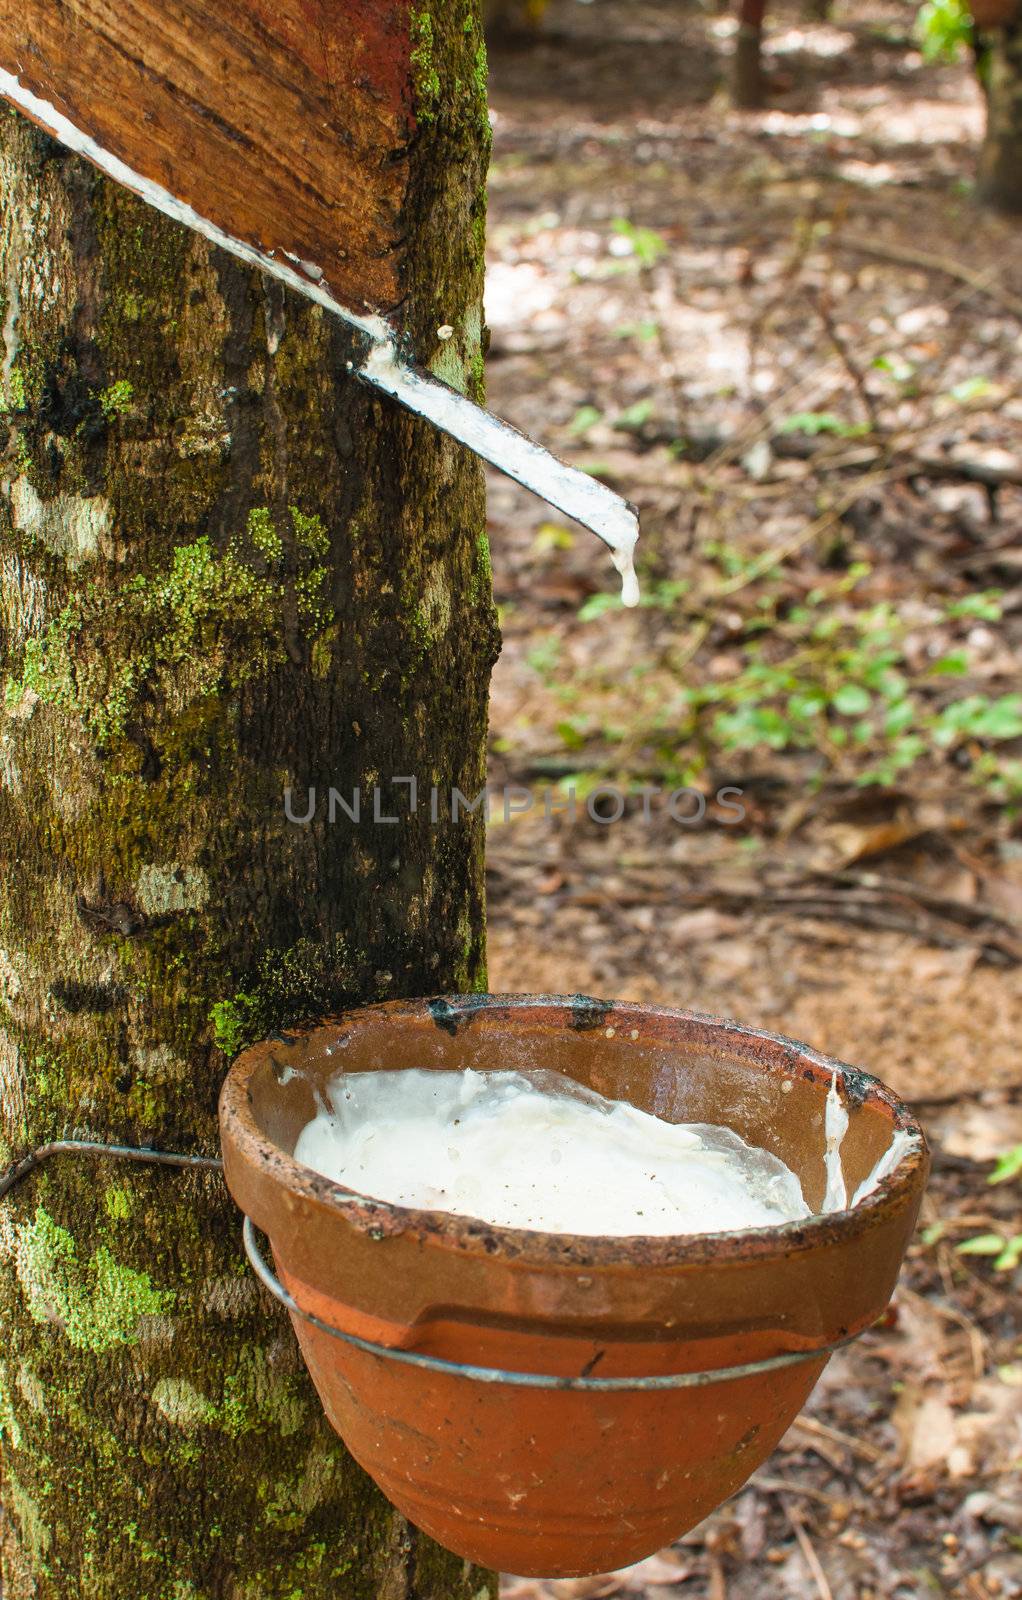 Tapping latex from a rubber tree by TanawatPontchour